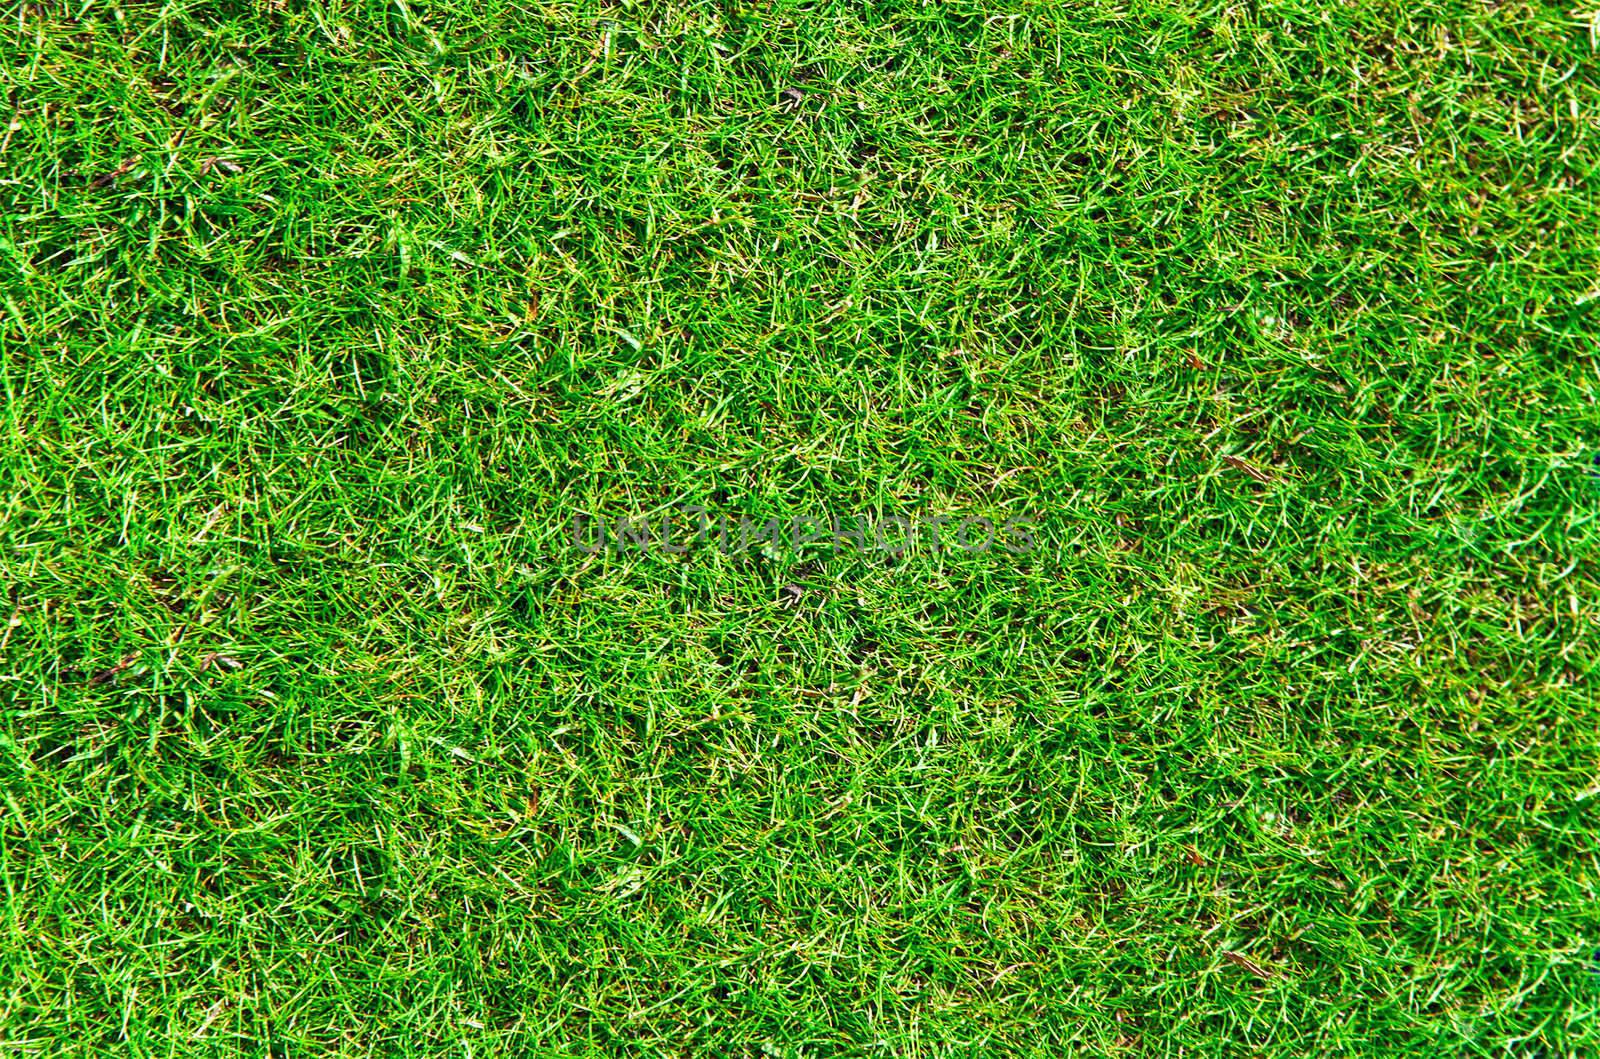 The real green grass background